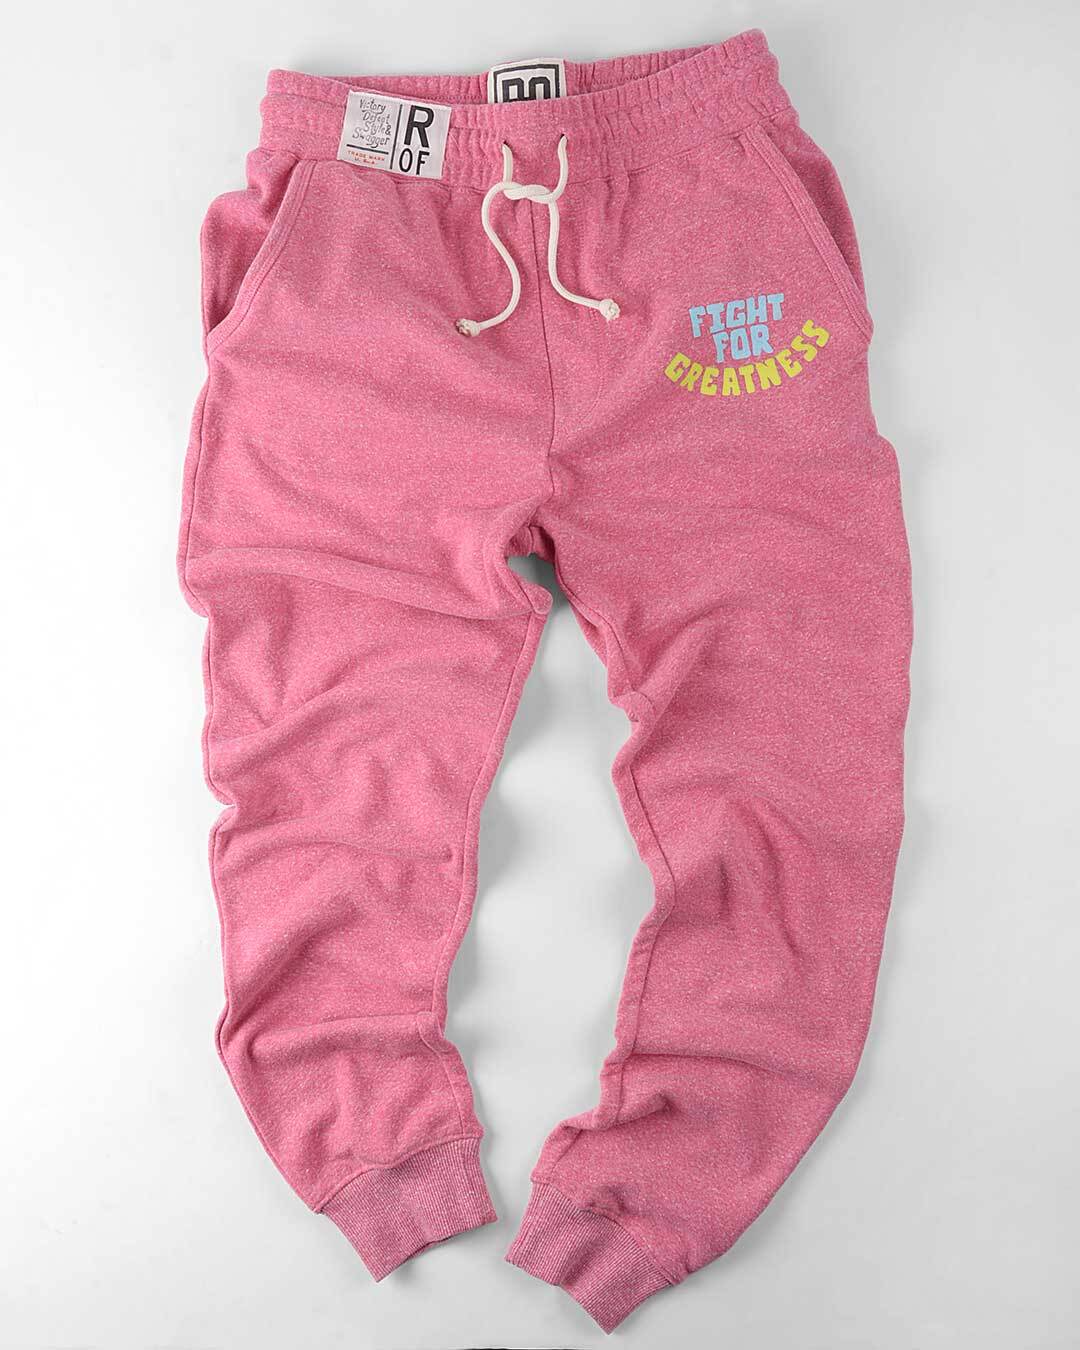 BHT - Culture of Greatness Pink Sweatpants